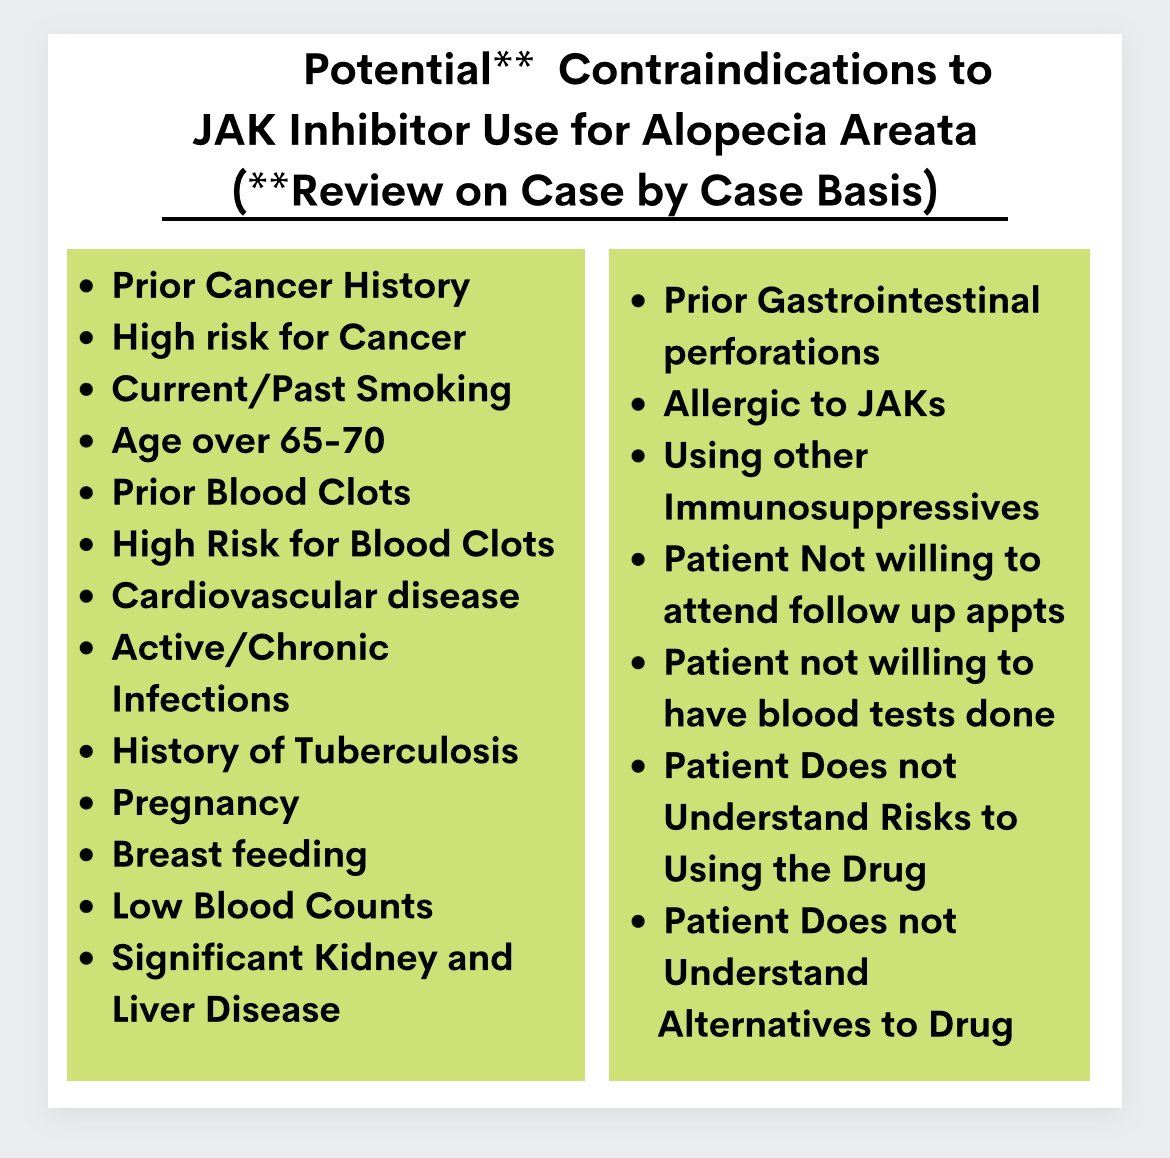 Not every patient with alopecia areata is a good candidate for a JAK inhibitor. Some reasons are reasons never to prescribe (absolute contraindication. Other reasons are reviewed on a case by case basis (relative contraindication). #alopeciaareata #jakinhibitors